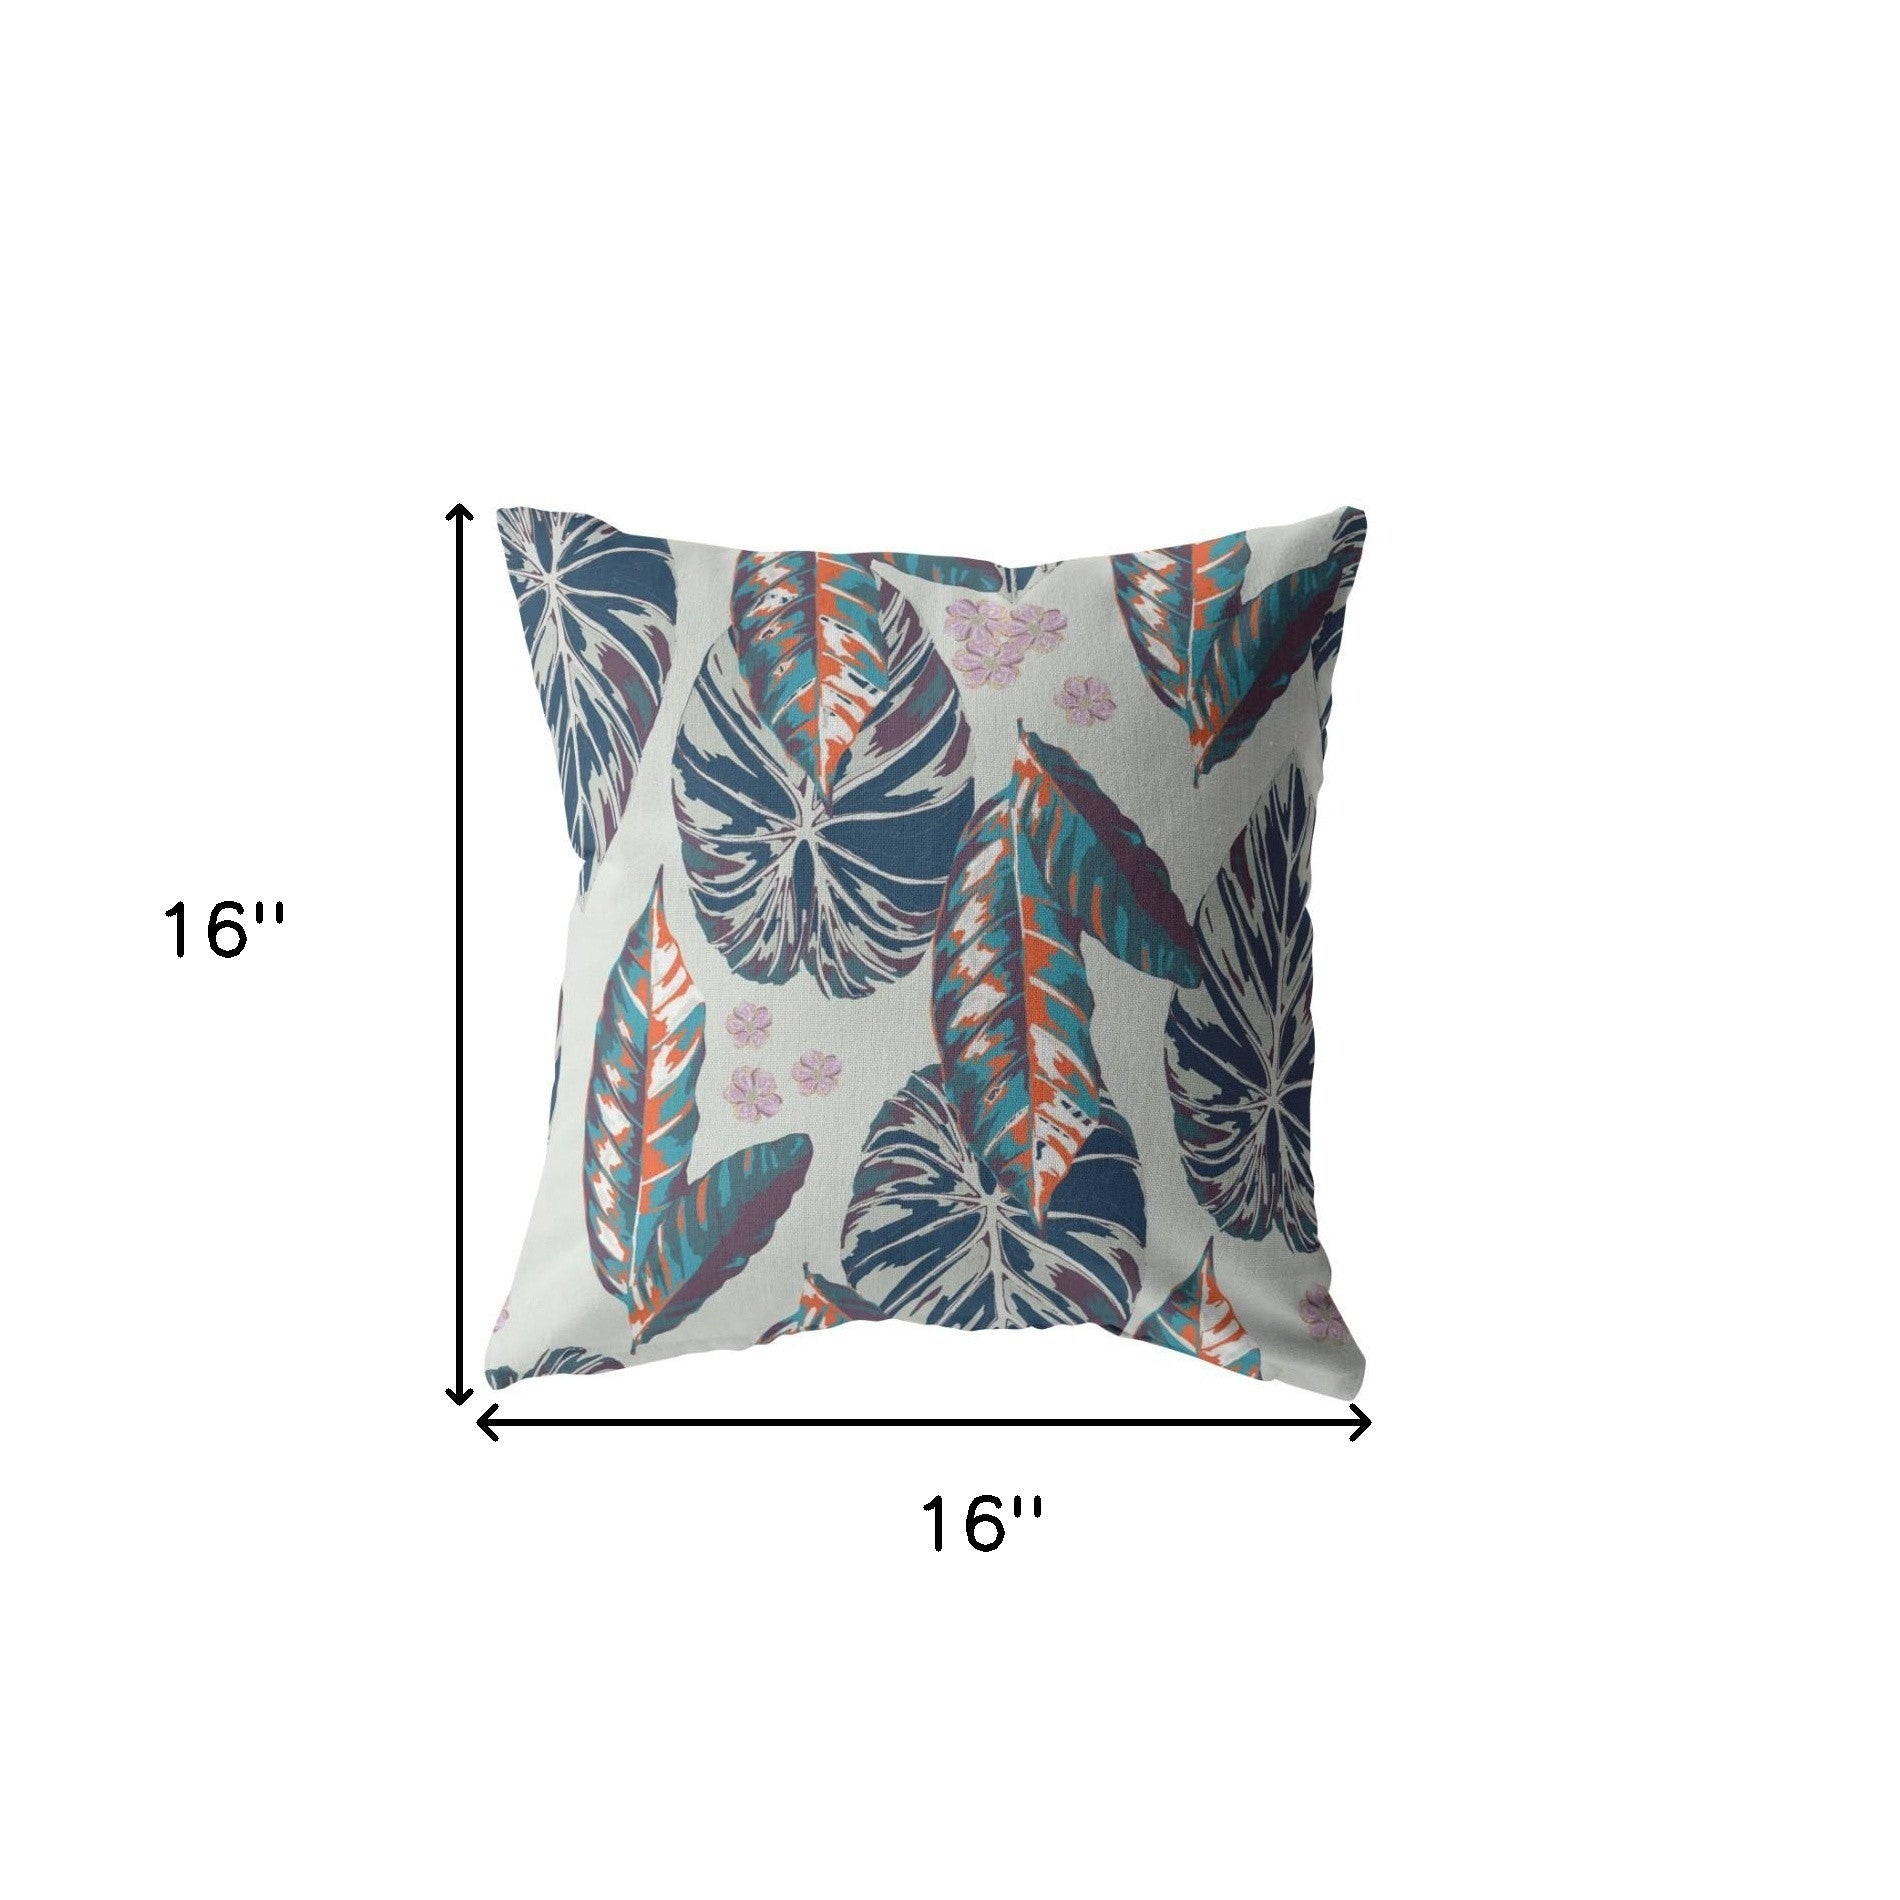 16” Blue Gray Tropical Leaf Indoor Outdoor Zippered Throw Pillow